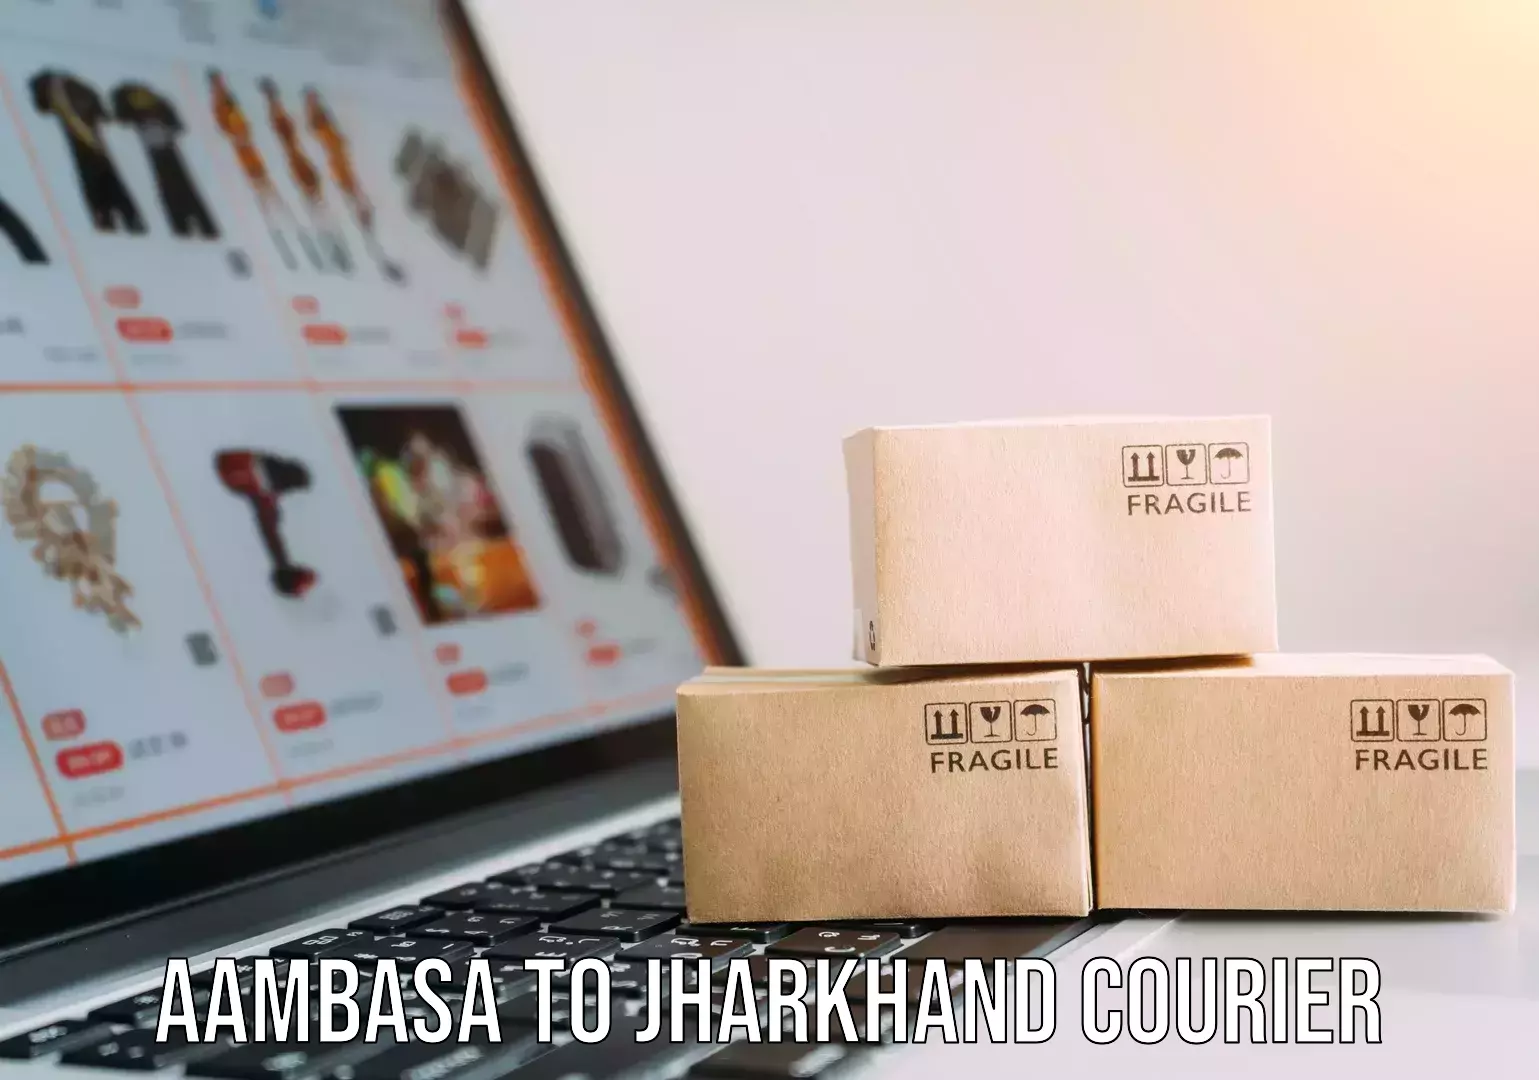 Sustainable delivery practices in Aambasa to Jharkhand